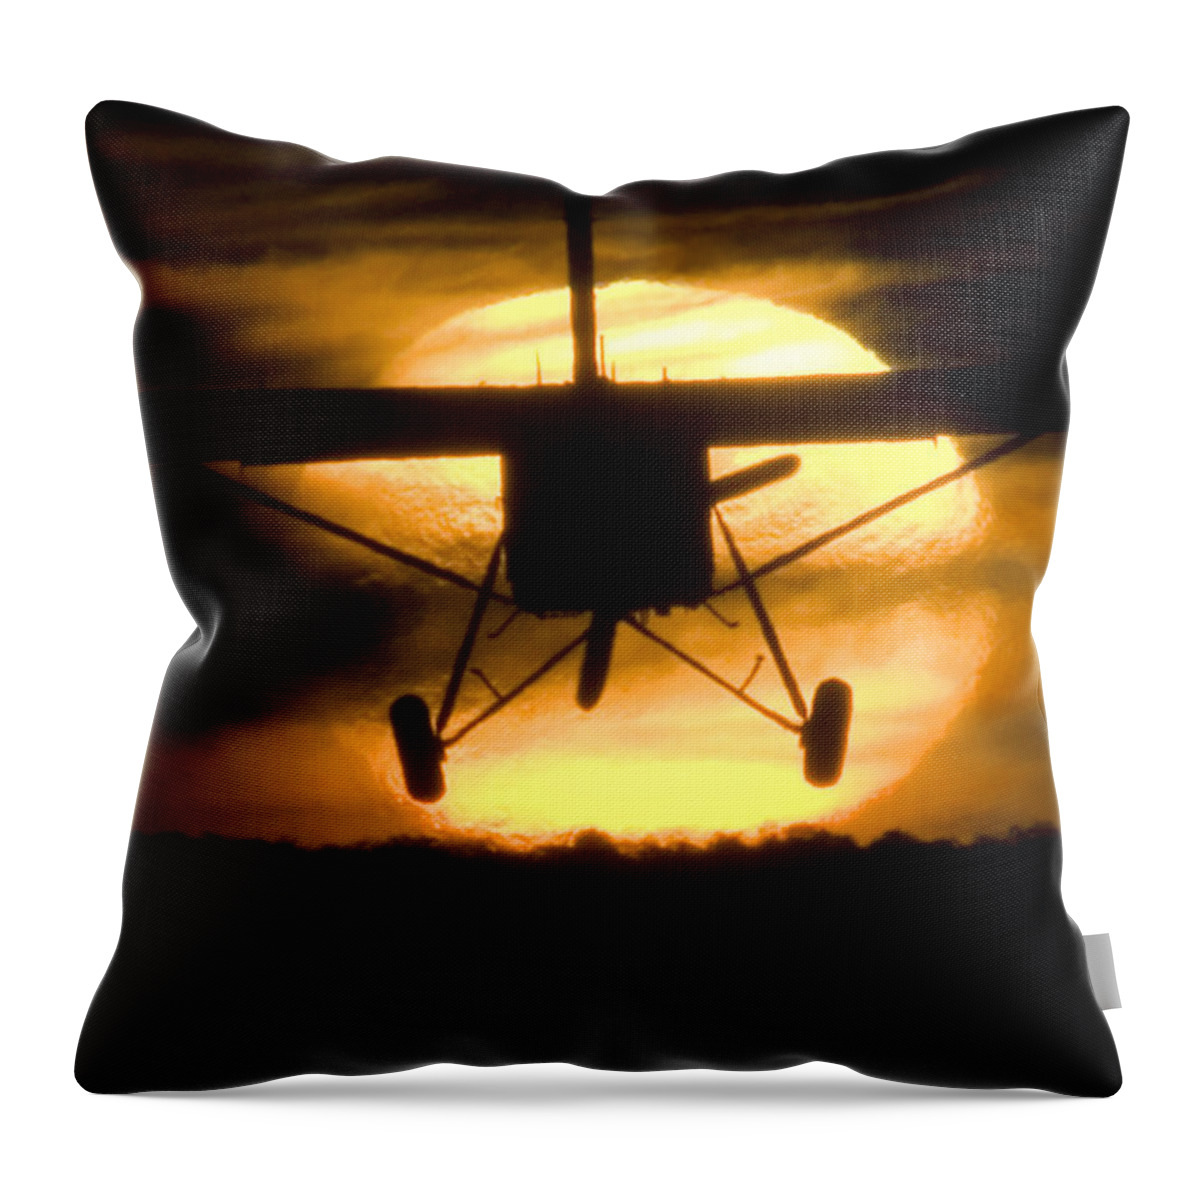 Sky Throw Pillow featuring the photograph African Sunset by Paul Job